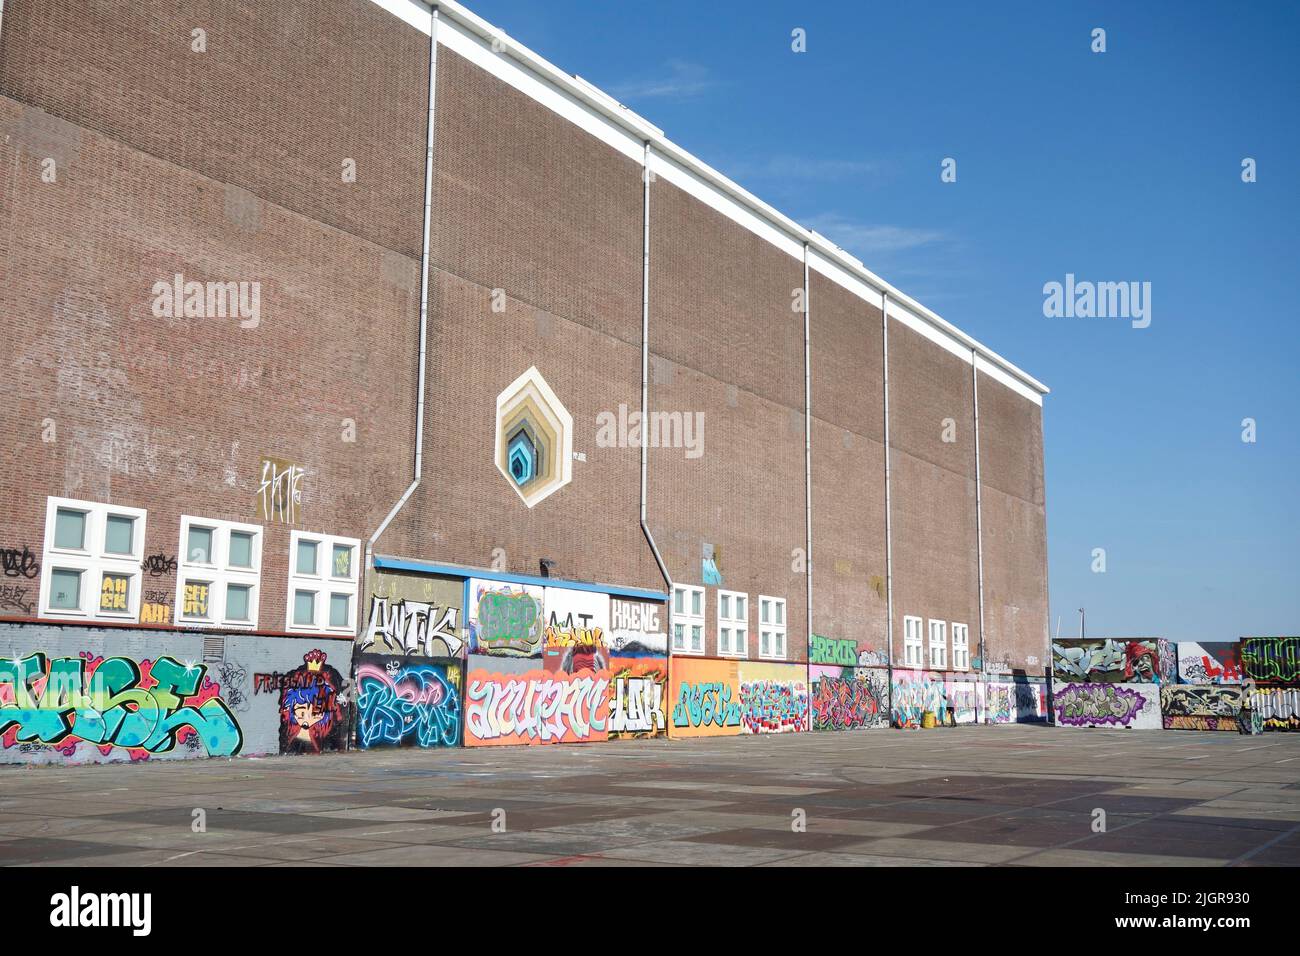 NDSM Amsterdam street scene - a former shipping wharf area in north-west Amsterdam which is used as a space for artists, exhibitions and festivals Stock Photo